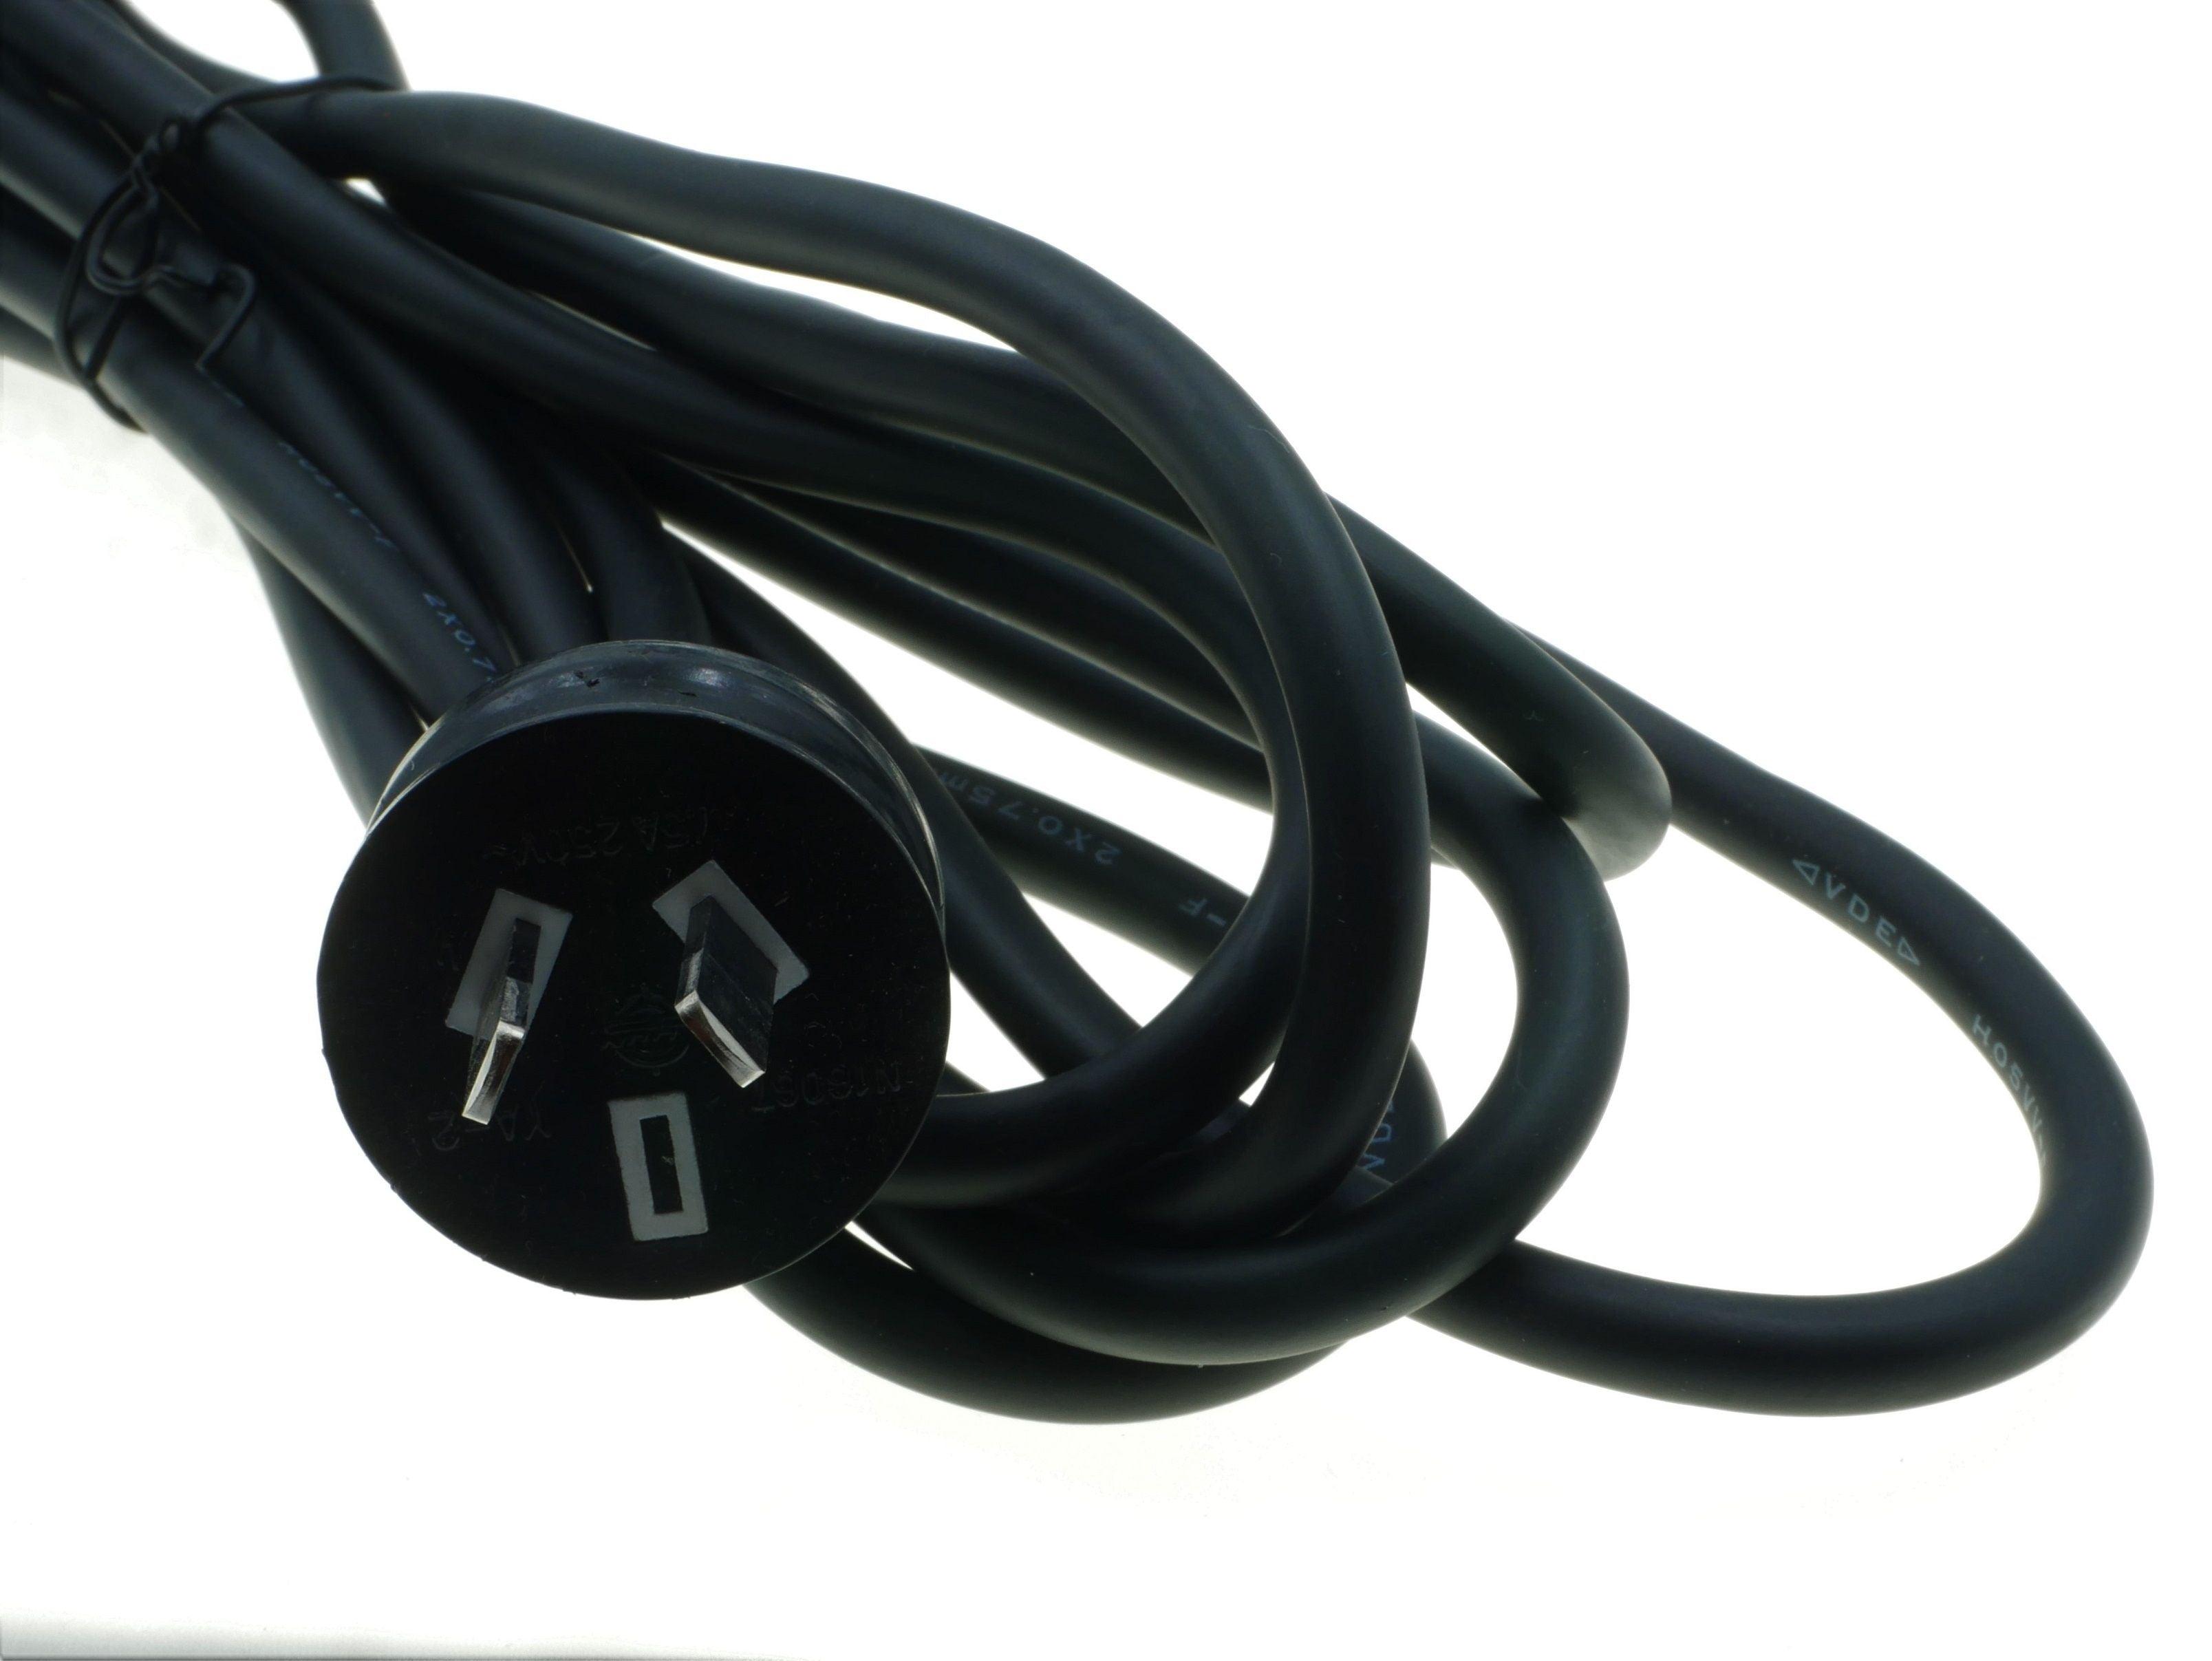 Power Cord Cable - 4 Meters